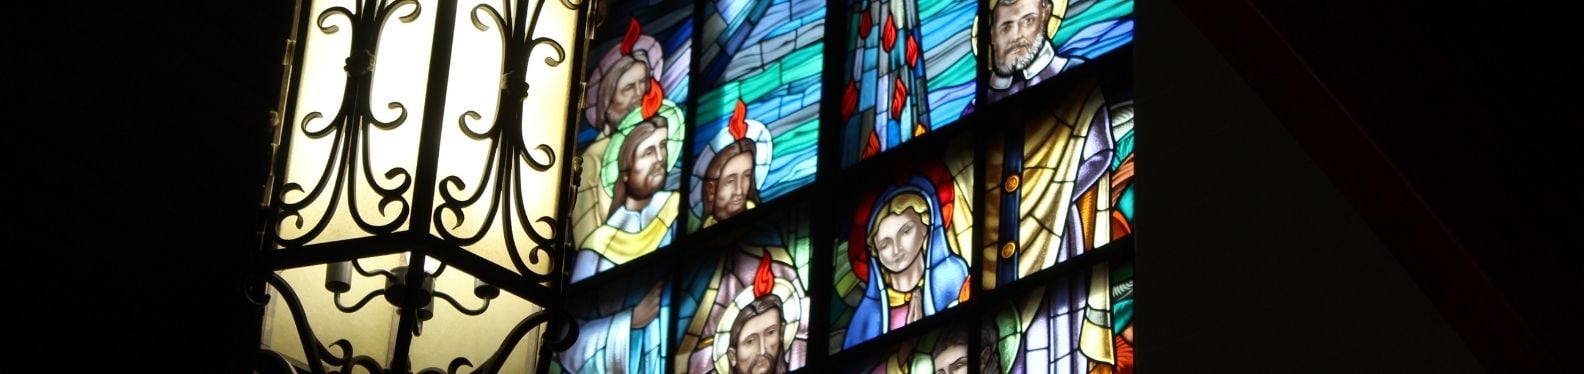 Photo of St. Jude's Pentecost stain glass window displaying the apostle receiving the holy spirit on Pentecost.